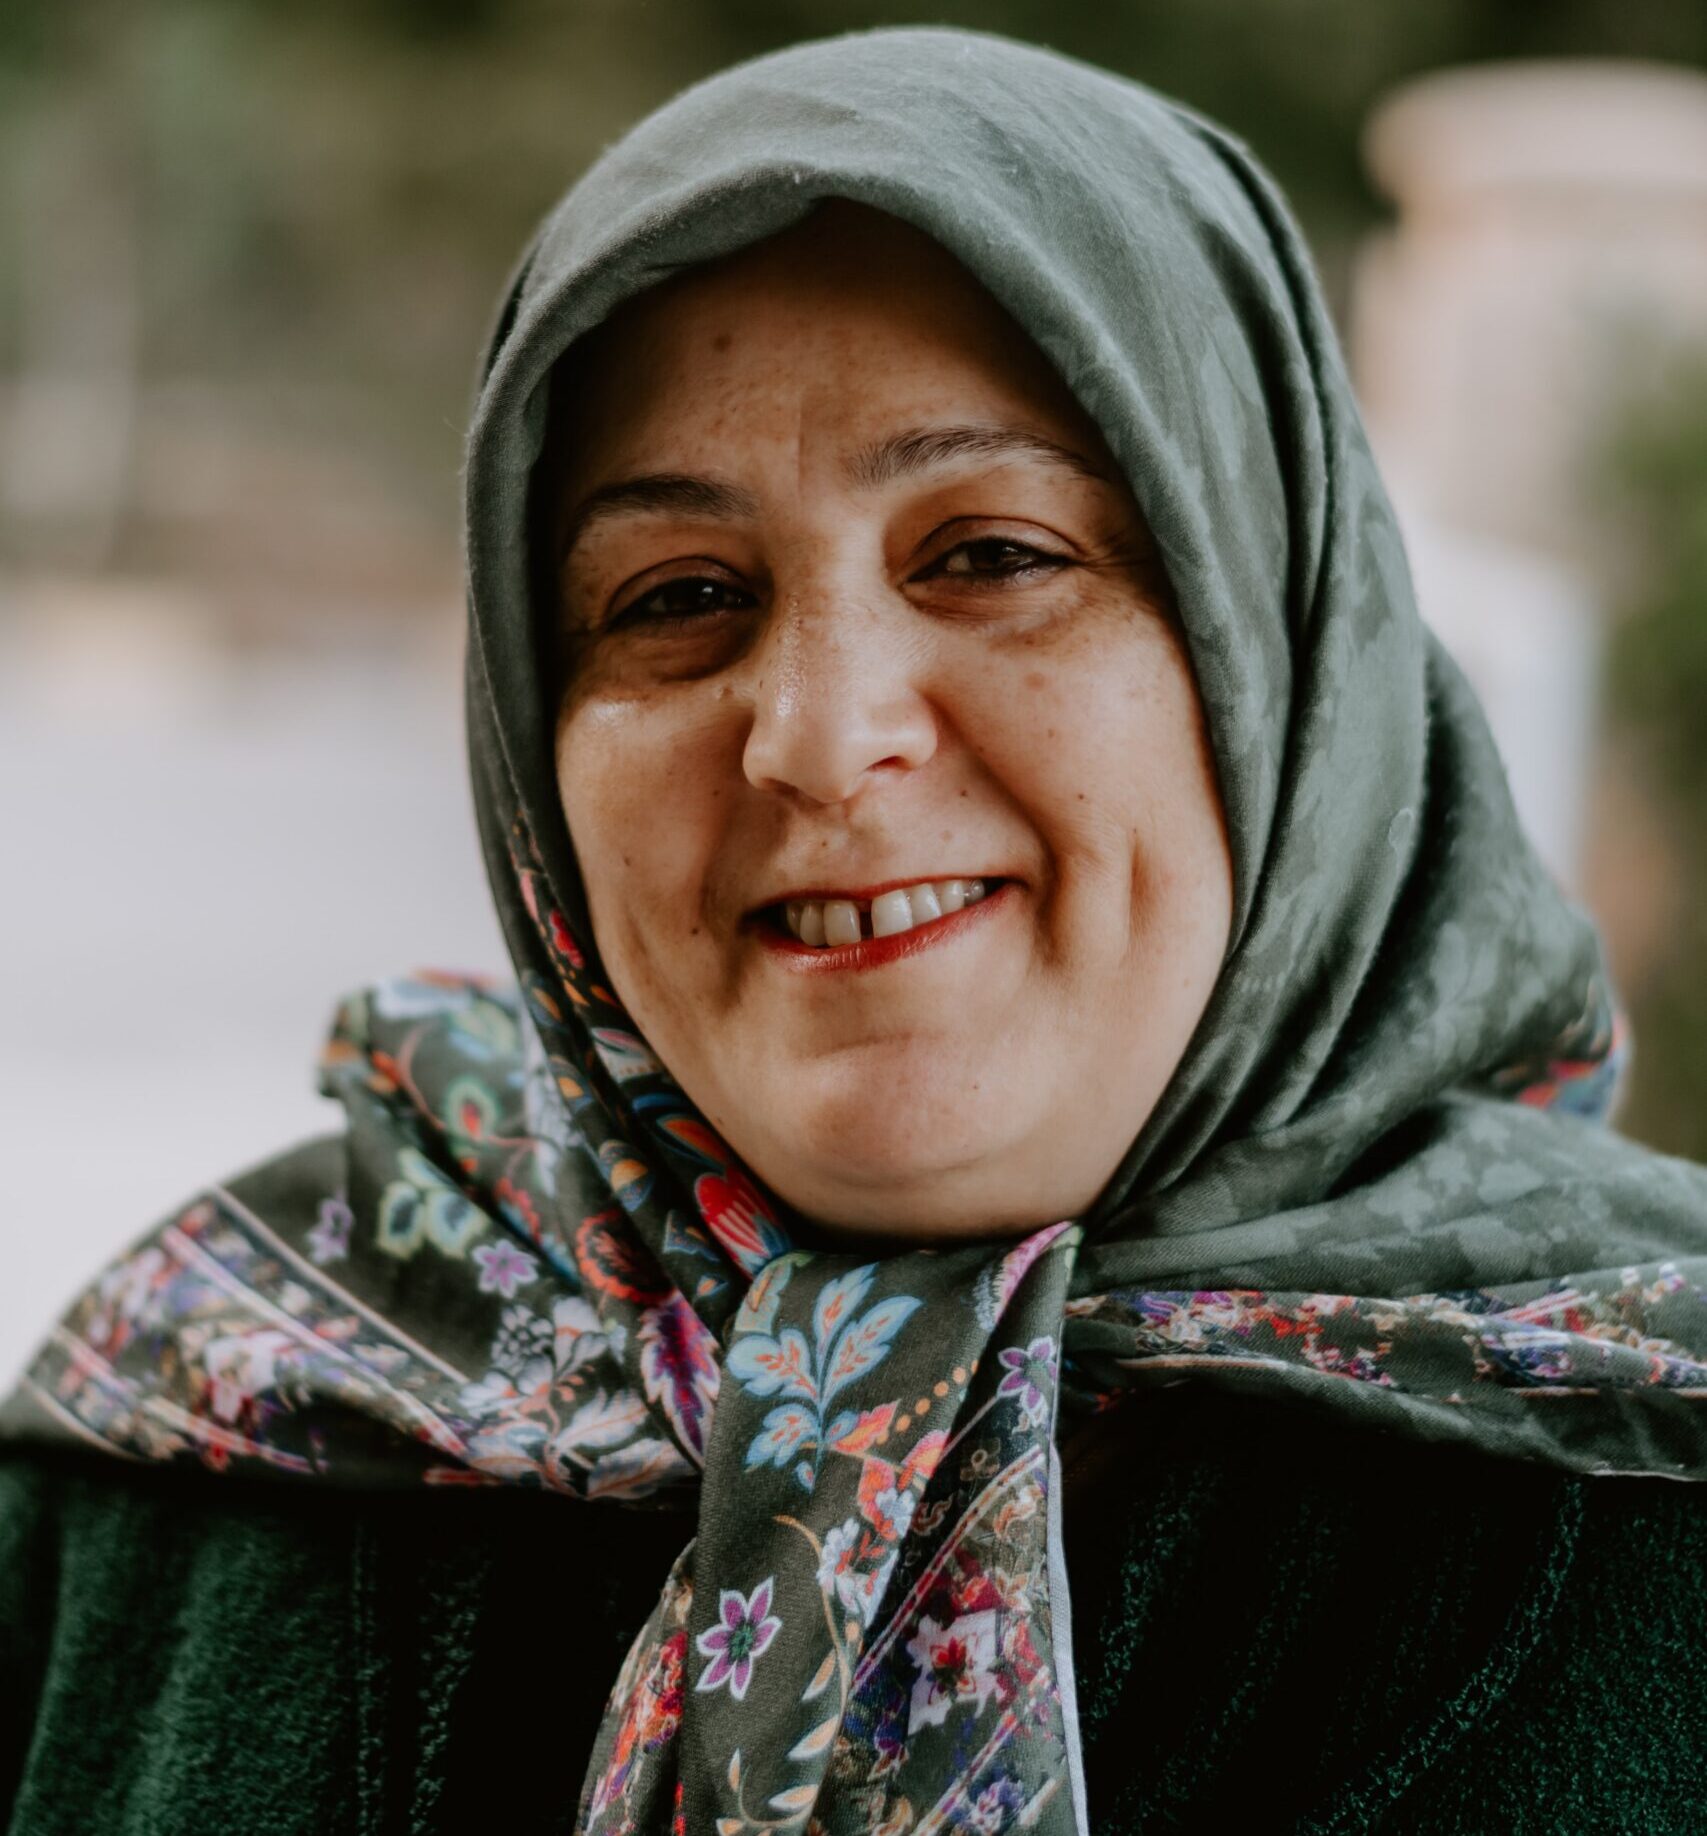 Refugee Employment - image of mature woman in headscarf and smiling